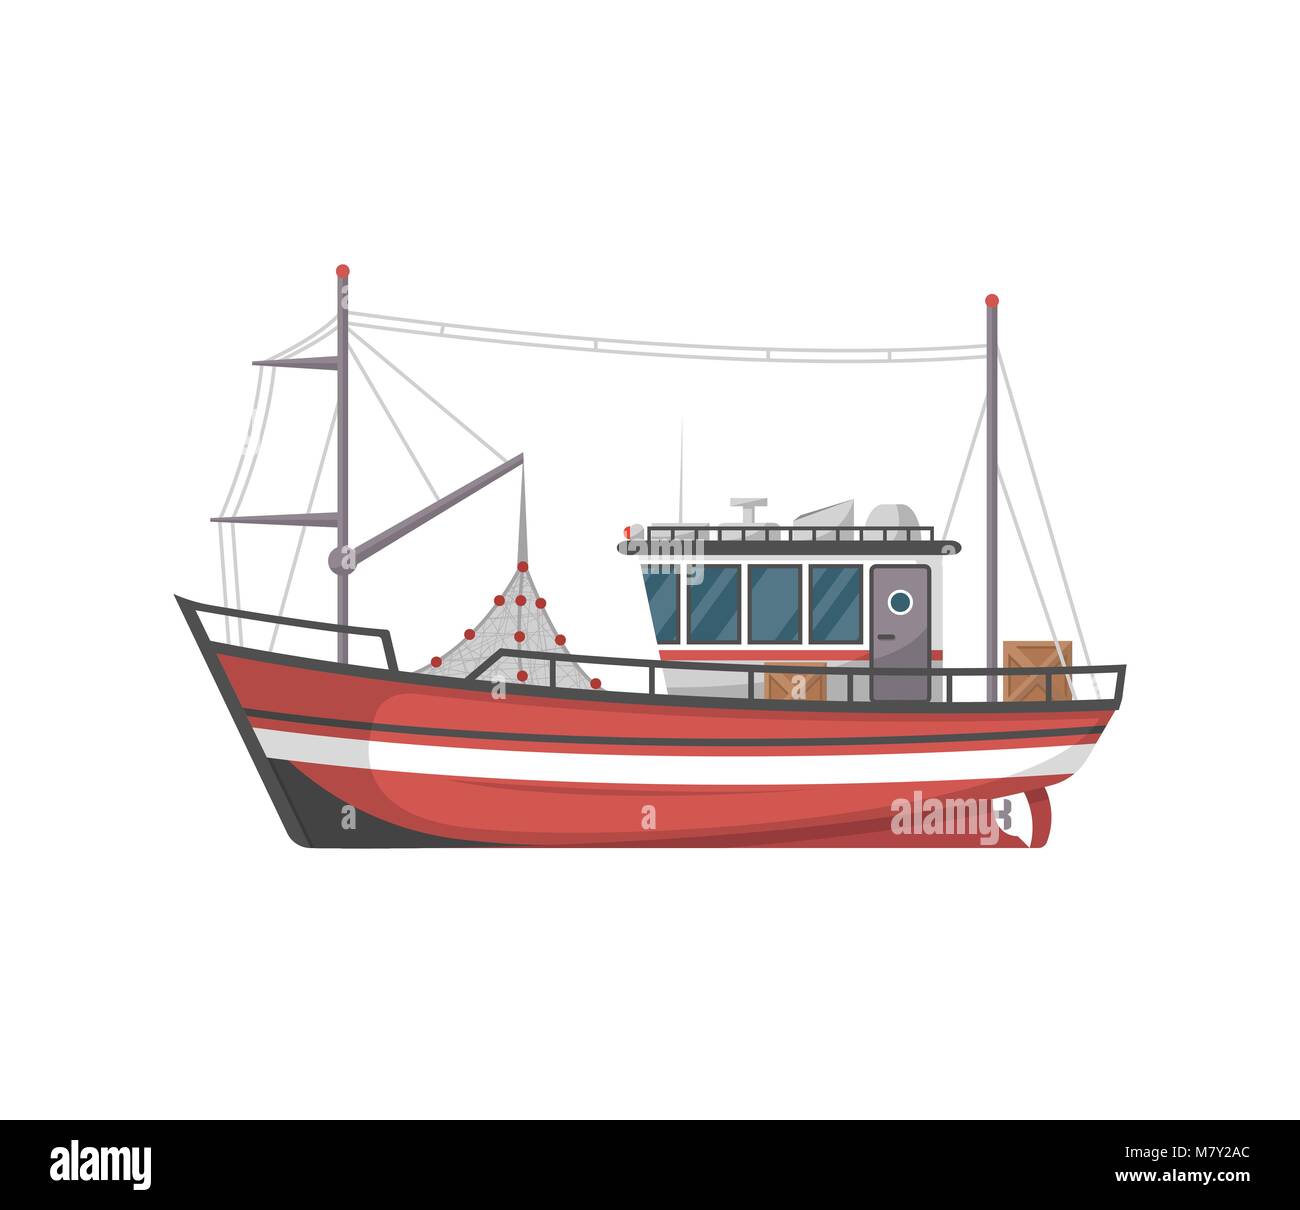 Vintage fishing boat side view icon Stock Vector